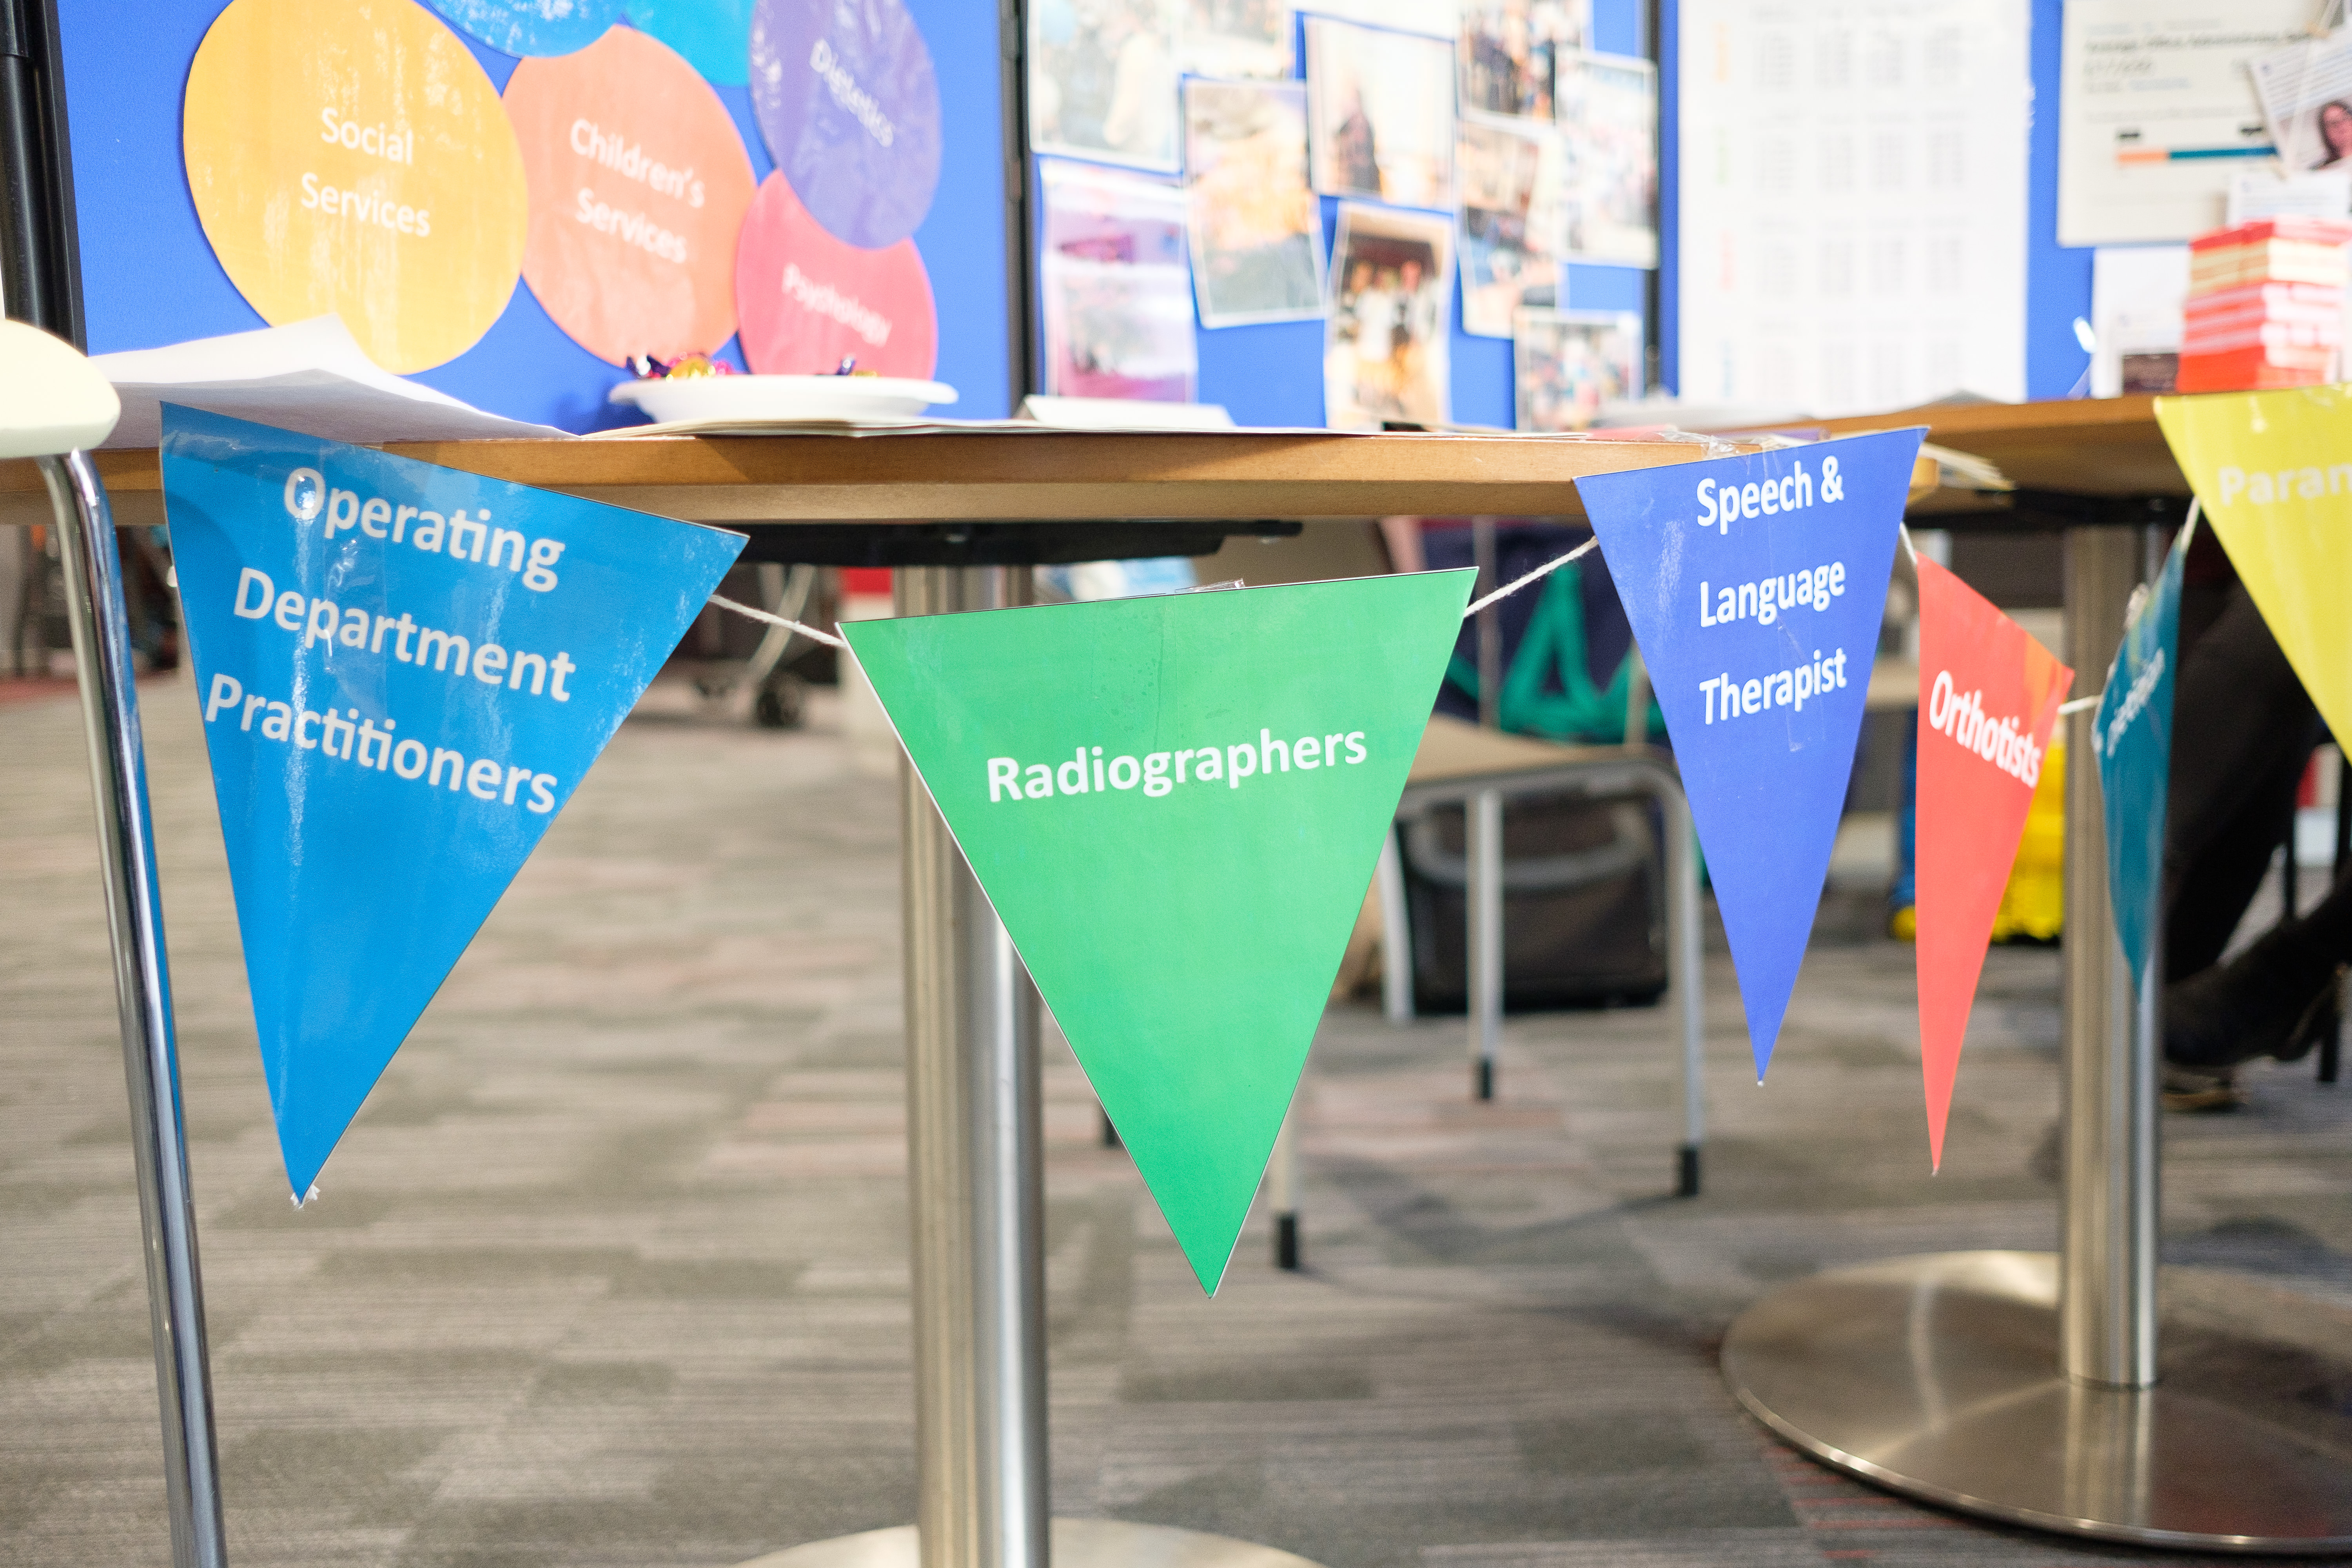 A table draped with bunting with the words operating department practitioners, radiographers, speech and language therapists and orthotists on